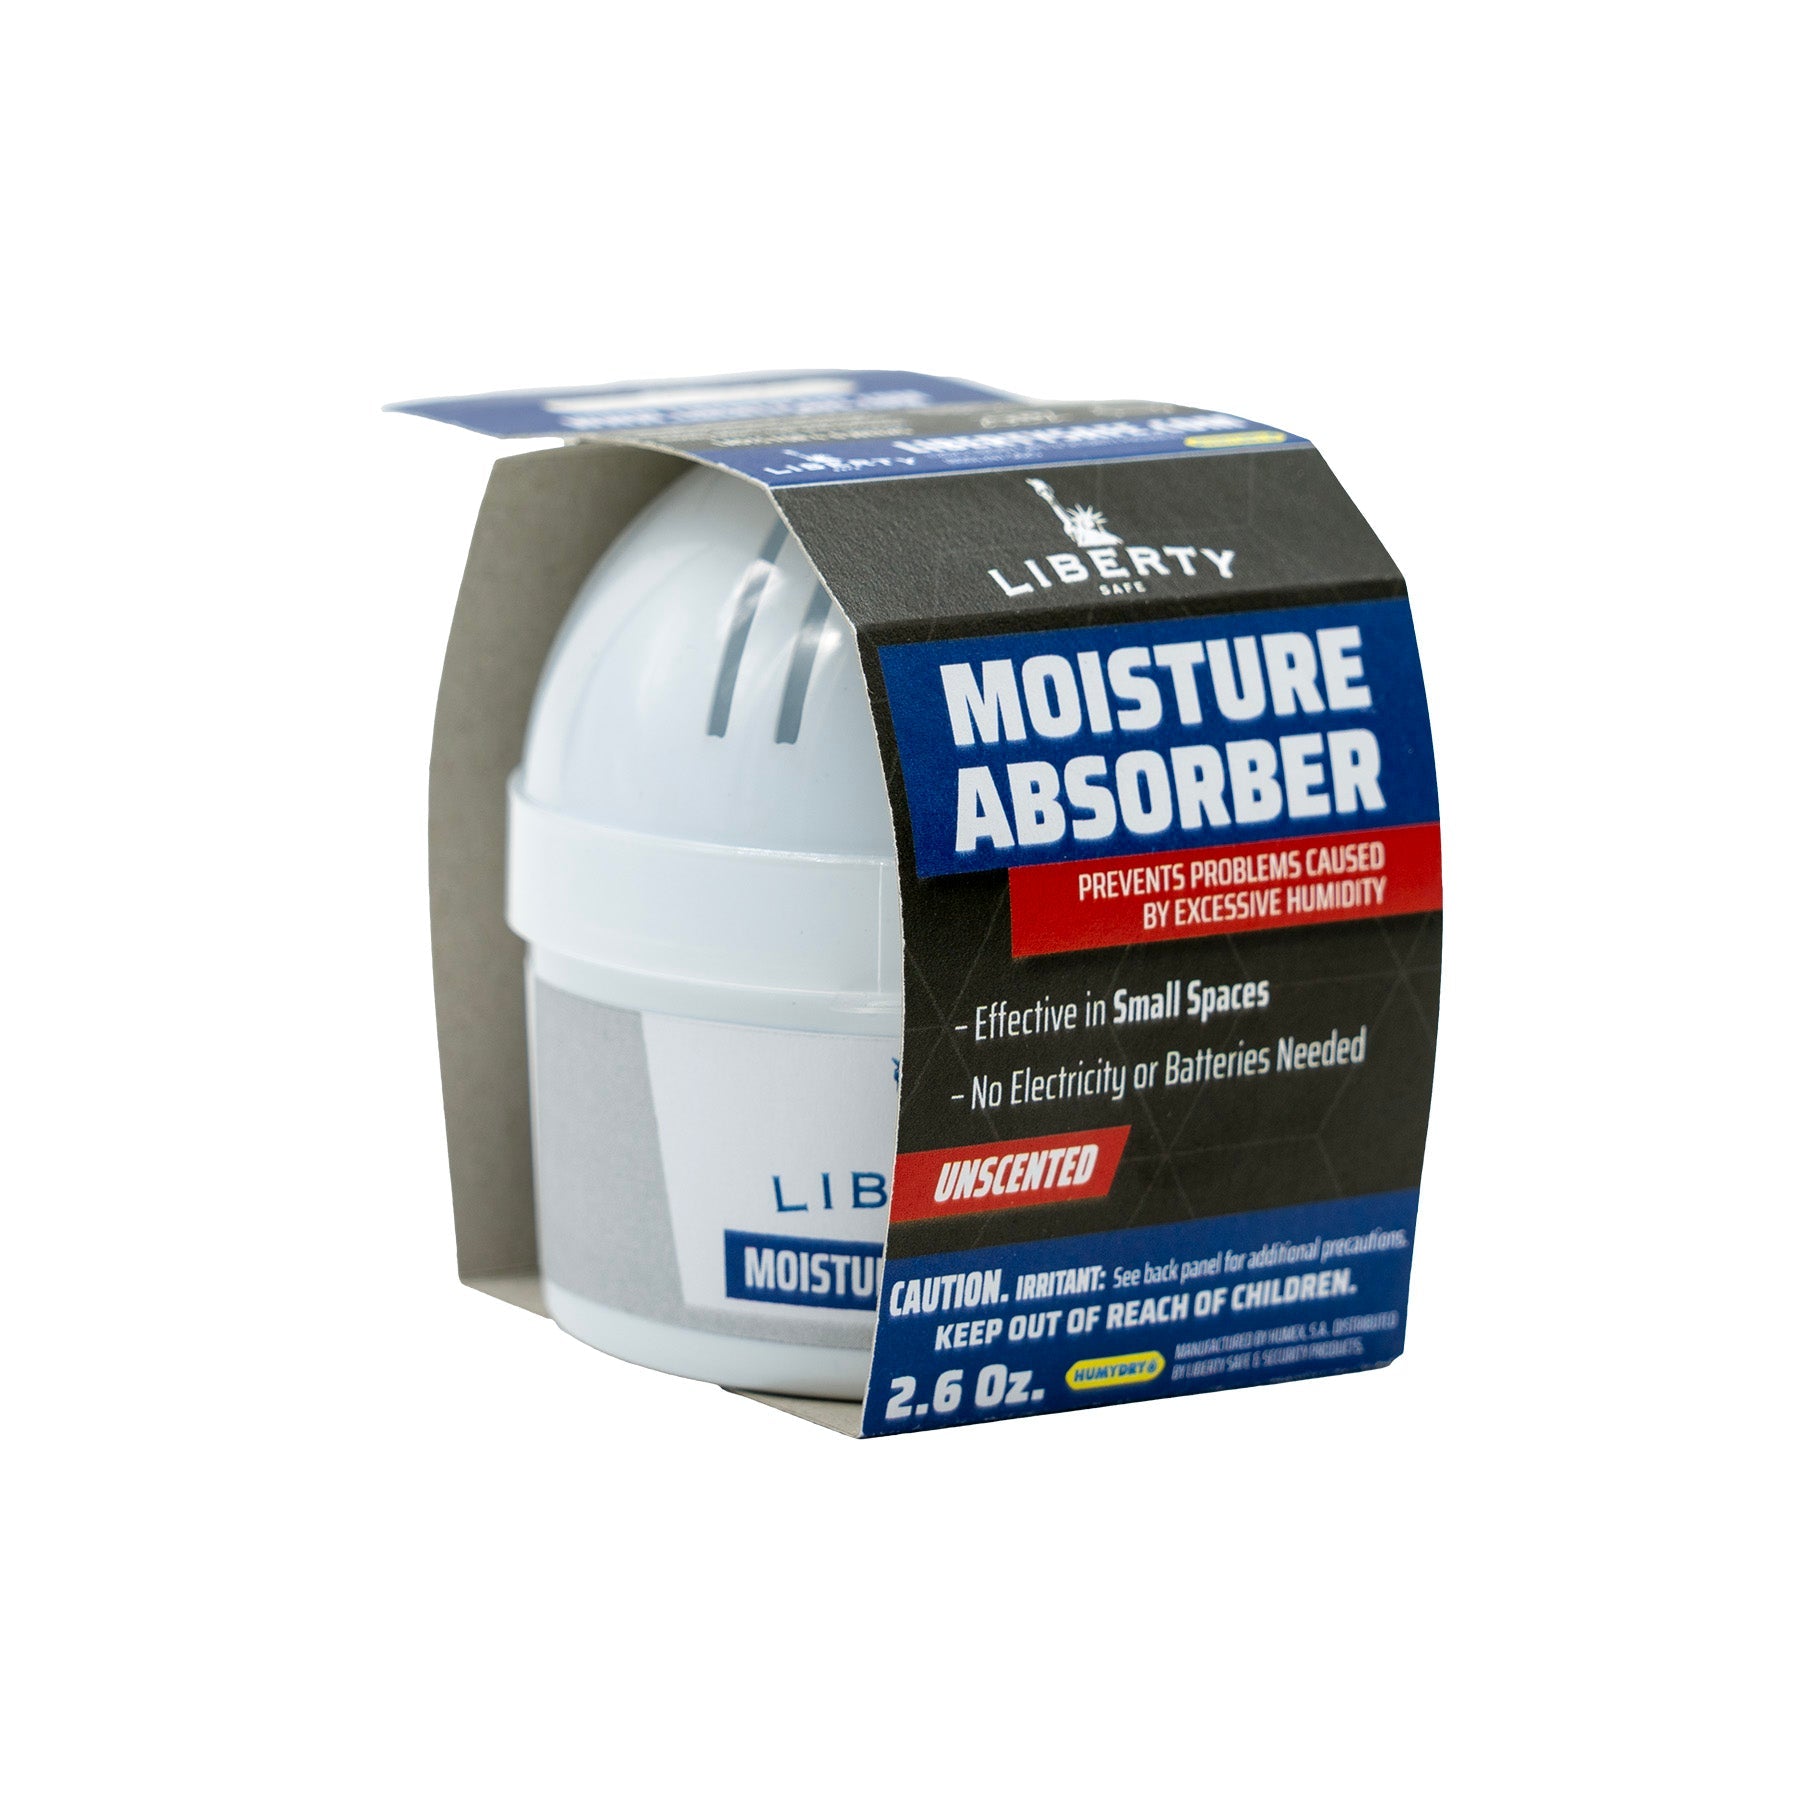 HumyDry Moisture Absorber 2.6 Ounce Package